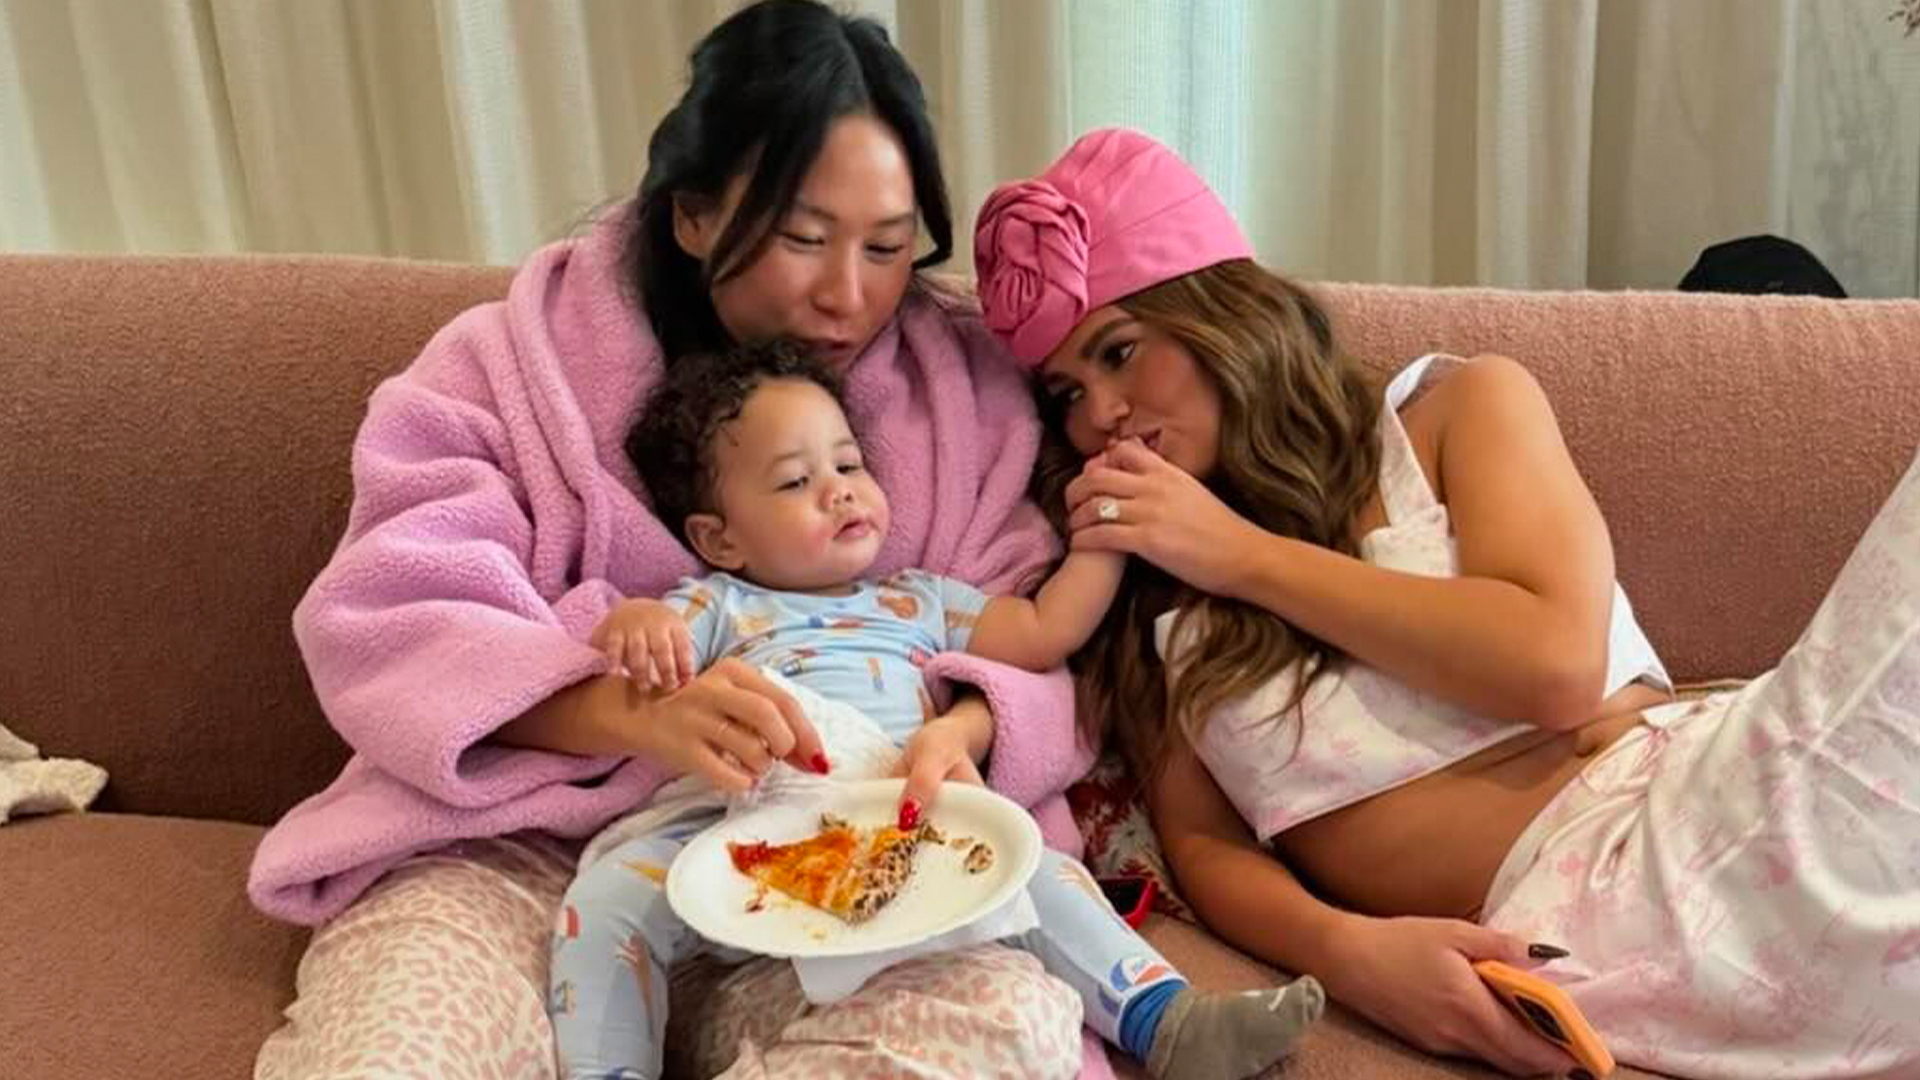 Chrissy Teigen’s Authenticity Wins Over Fans as She Shows Raw, Emotional Side of Life with Four Young Kids